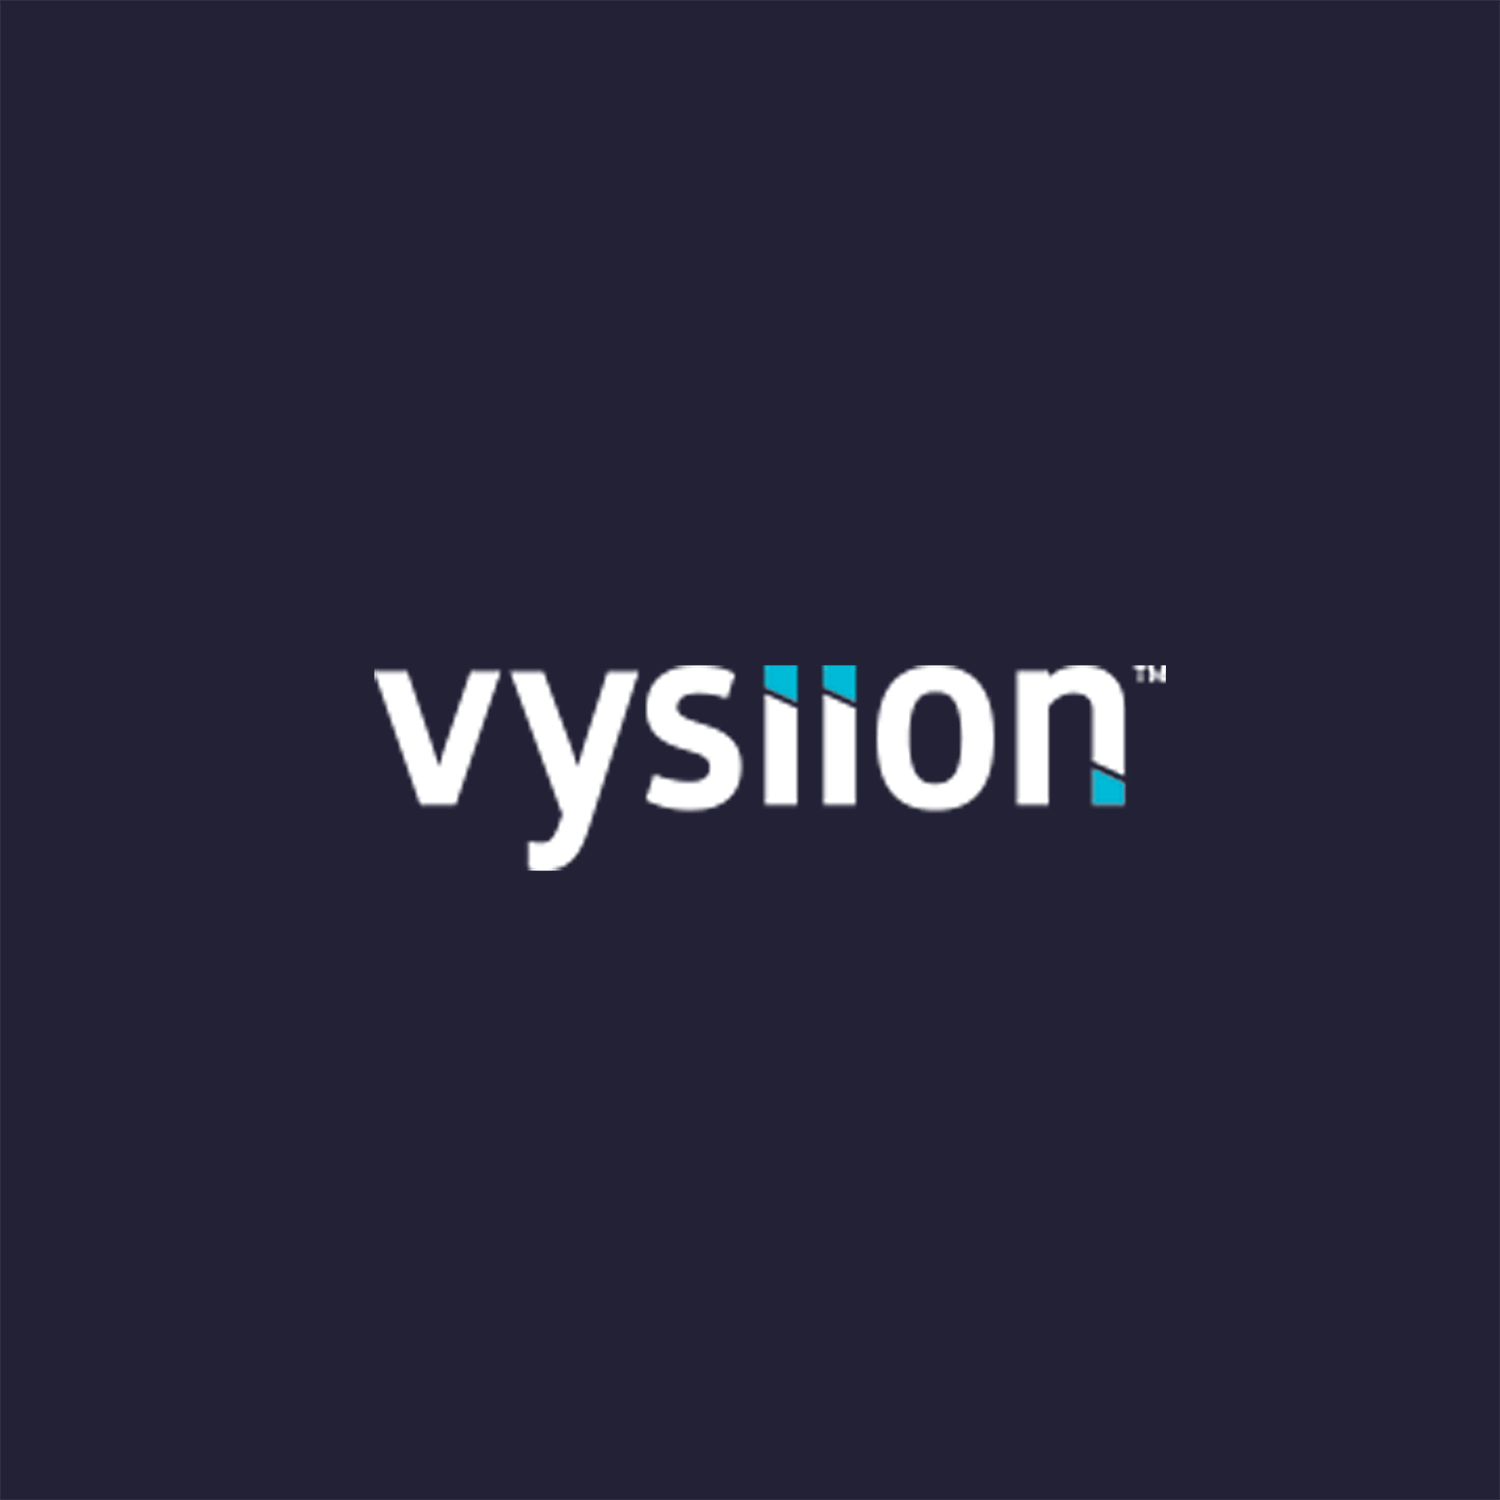 Vysiion Transforming businesses through managed technology solutions 